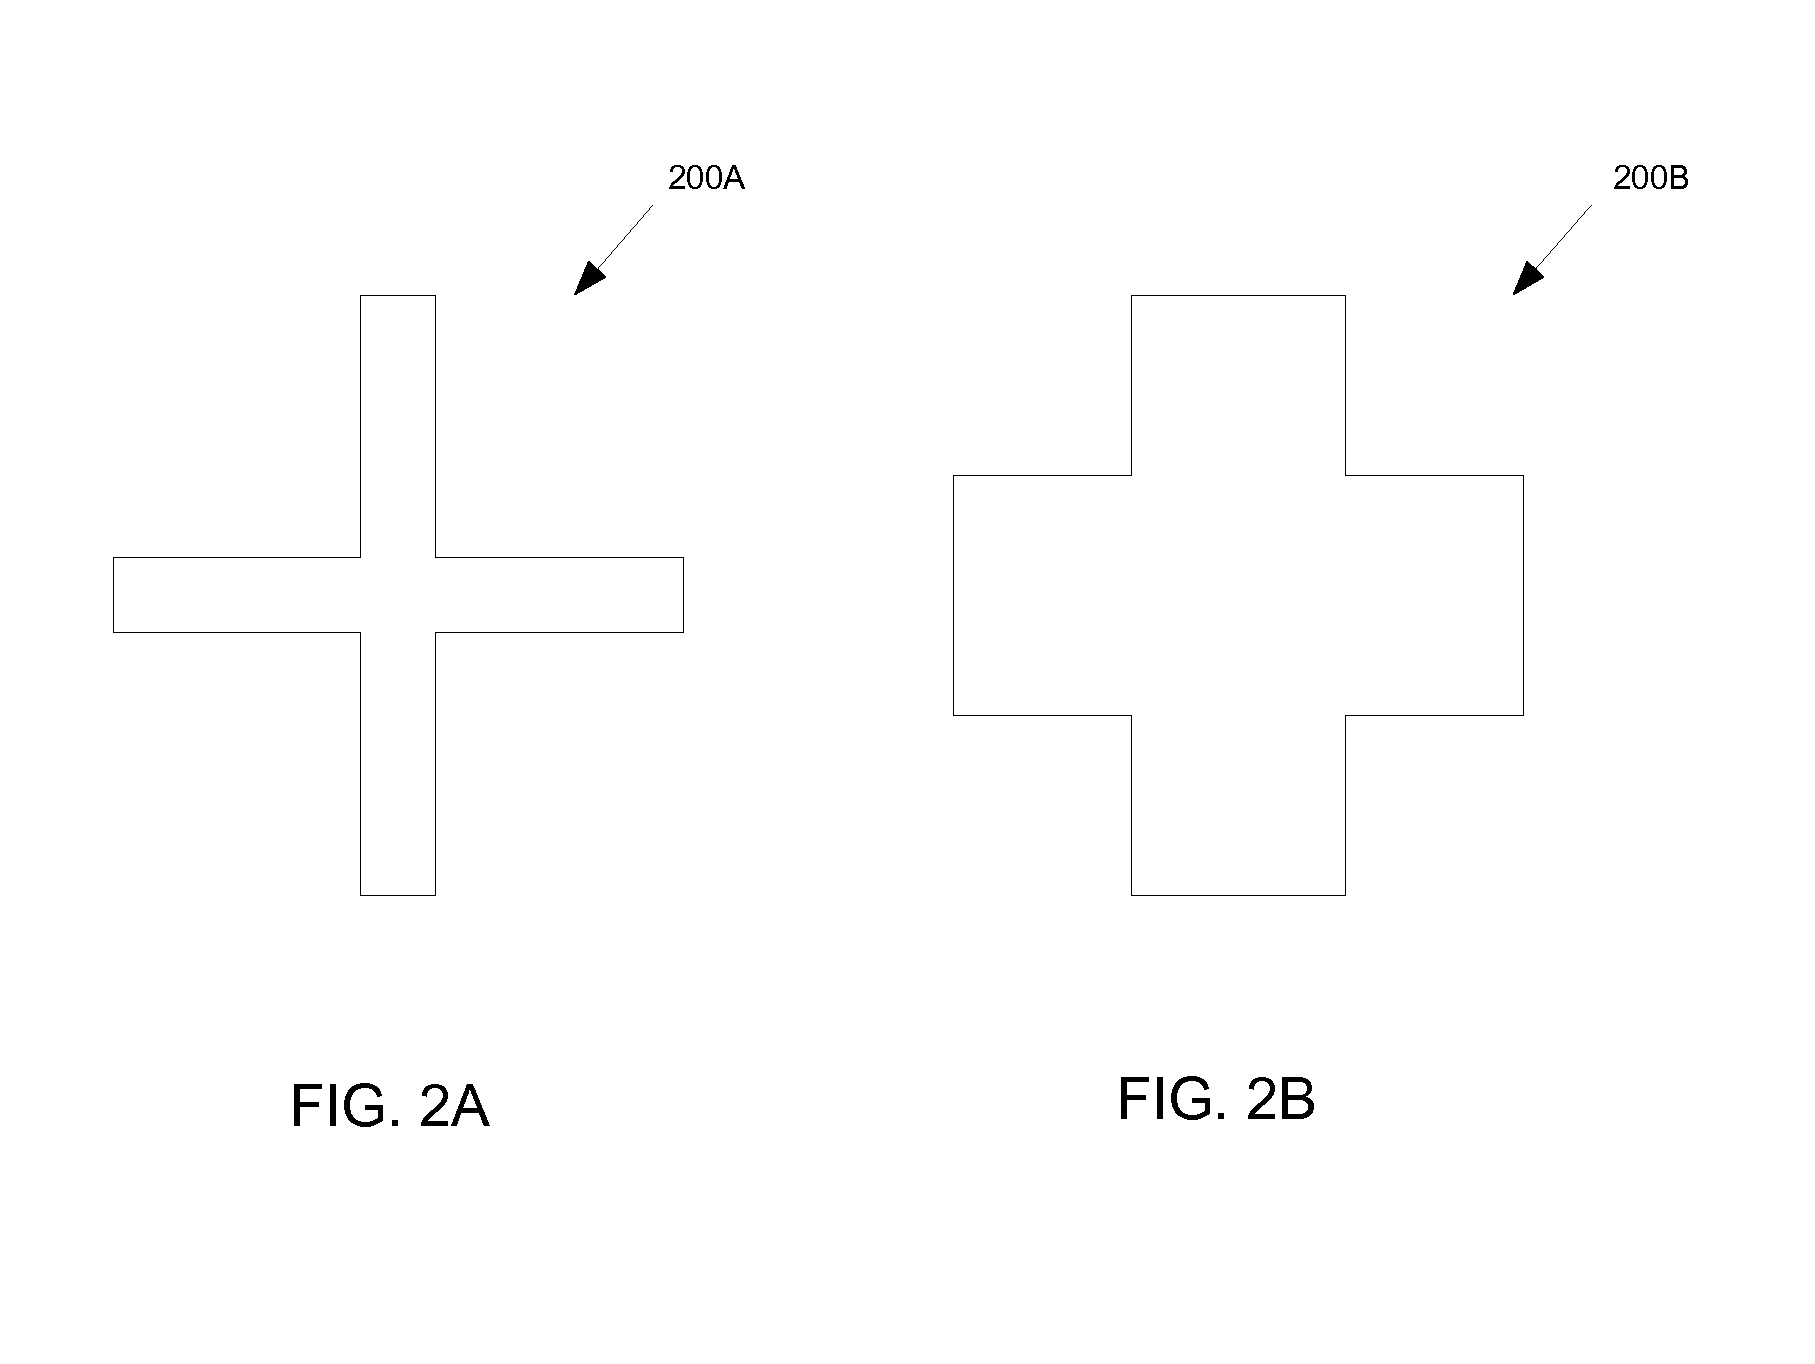 System and method for identifying and locating instances of a shape under large variations in linear degrees of freedom and/or stroke widths